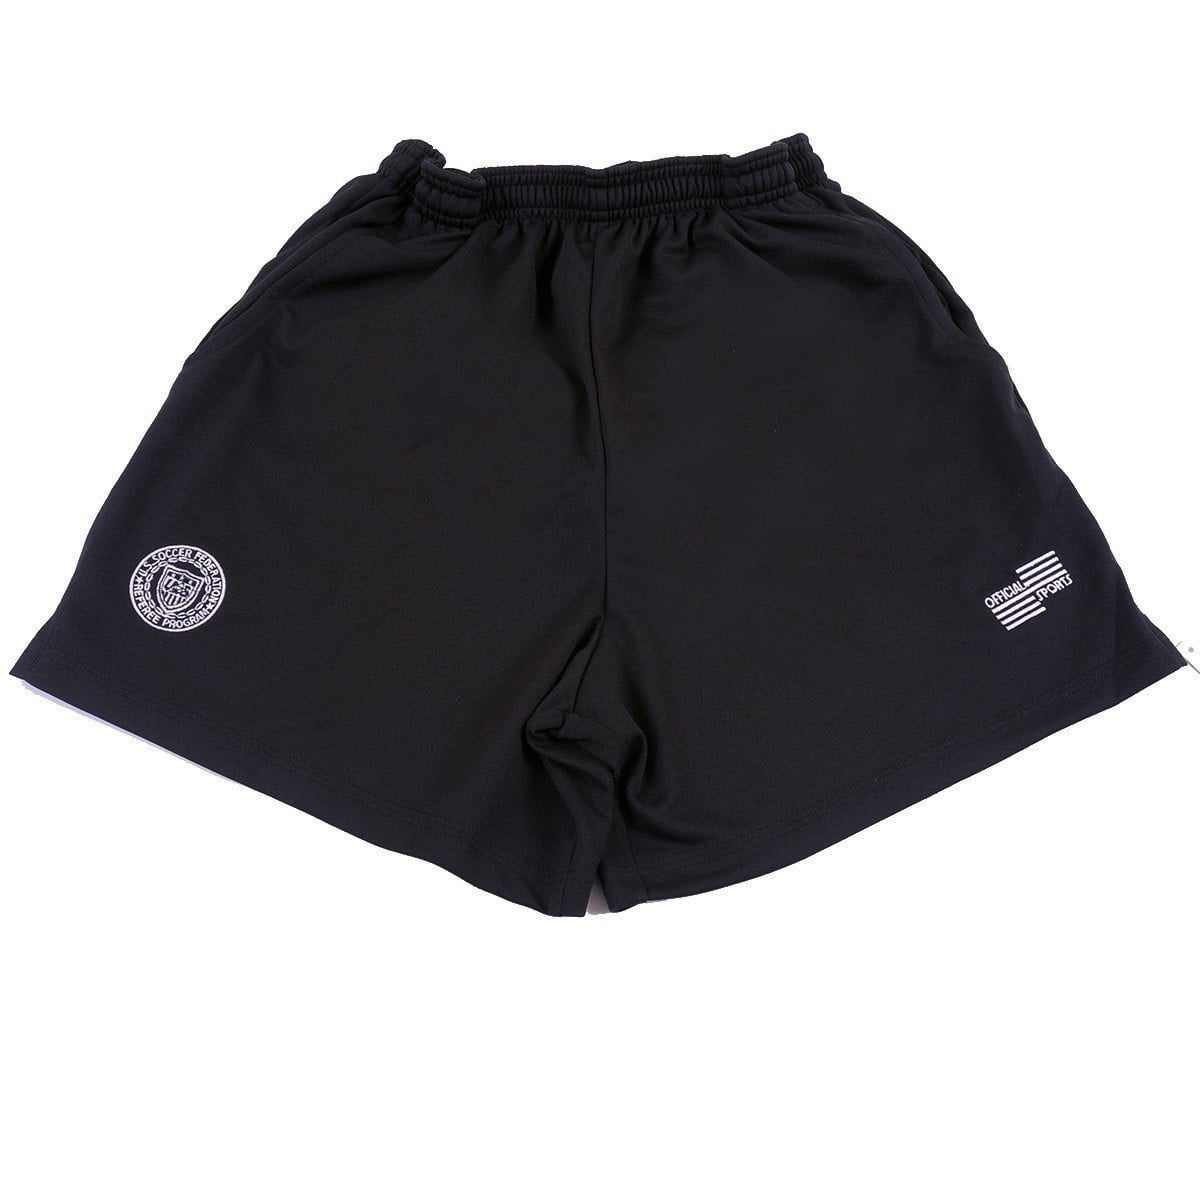 Official Sports Pro Referee Shorts: The Soccer Corner The Soccer Corner ...